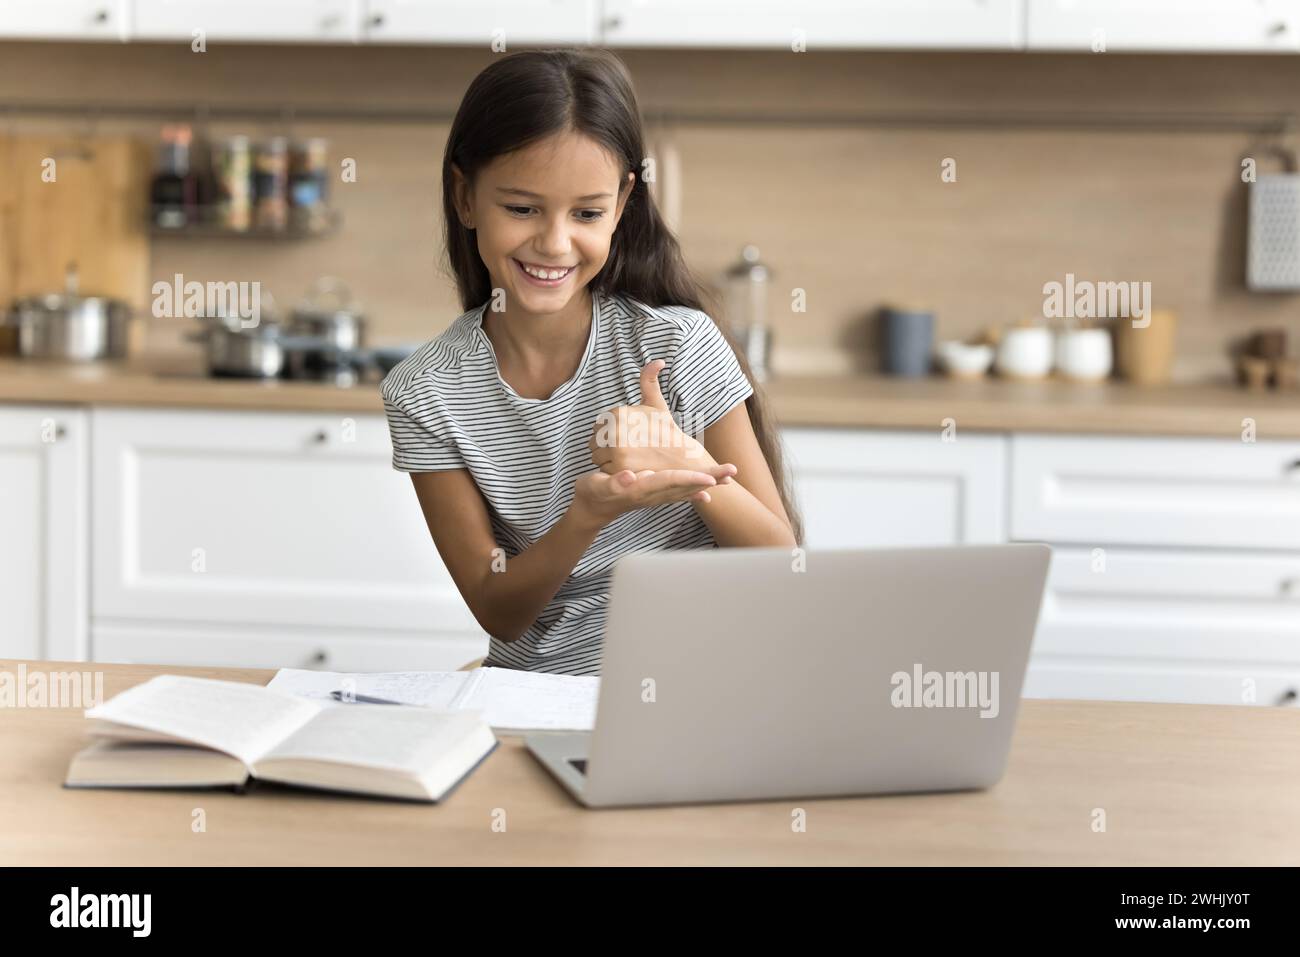 Positive pre teen schoolkid girl with hearing disability using laptop Stock Photo